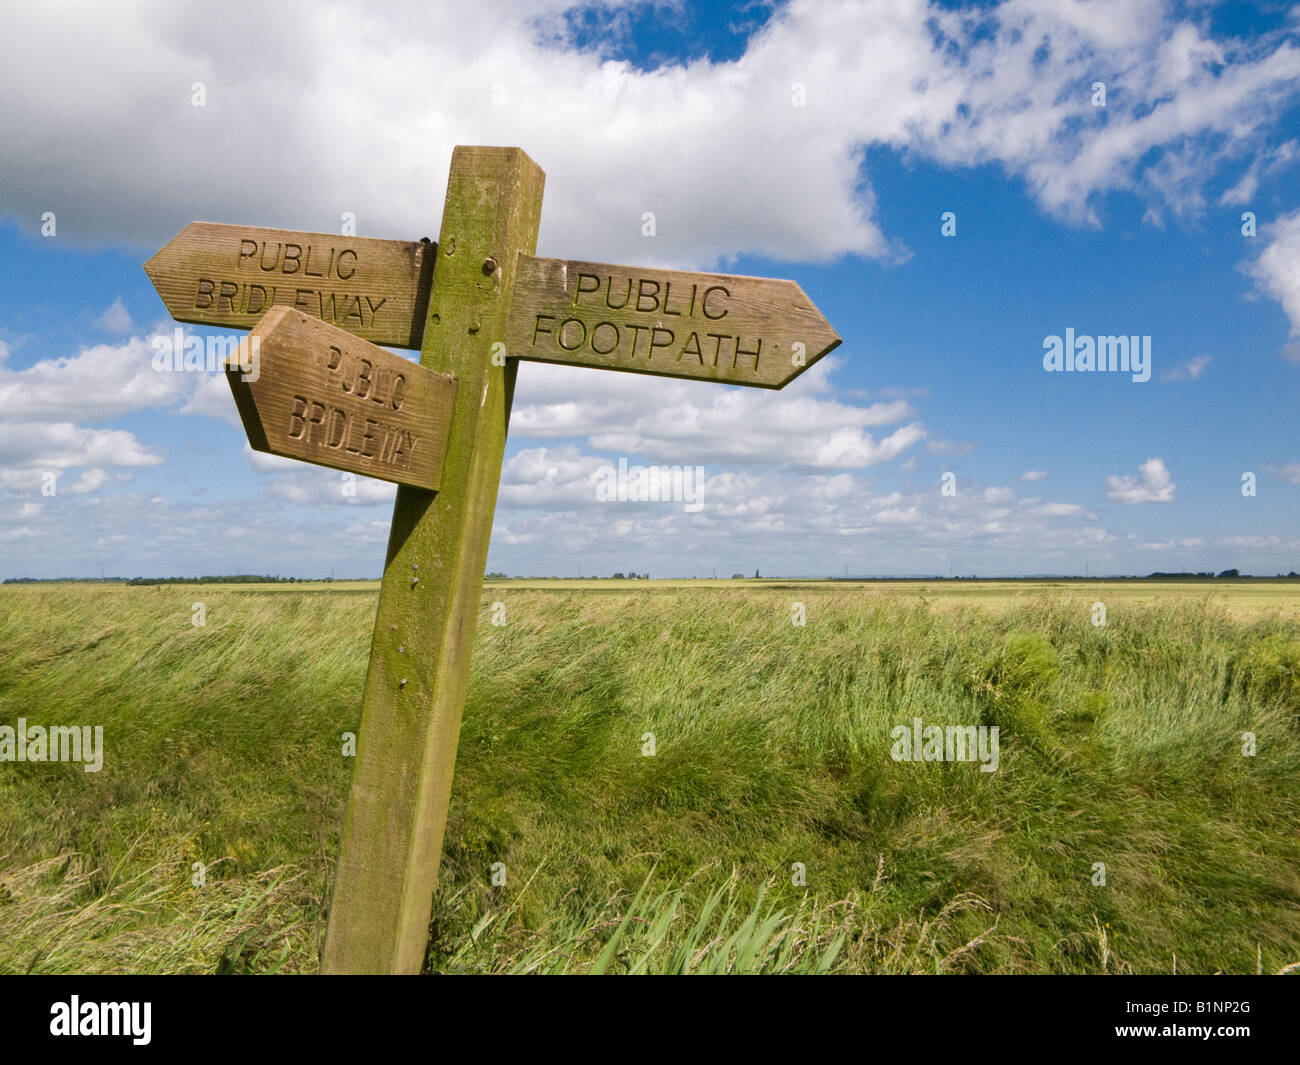 Footpath signpost sign indicating public footpaths and bridleways, Yorkshire, UK Stock Photo